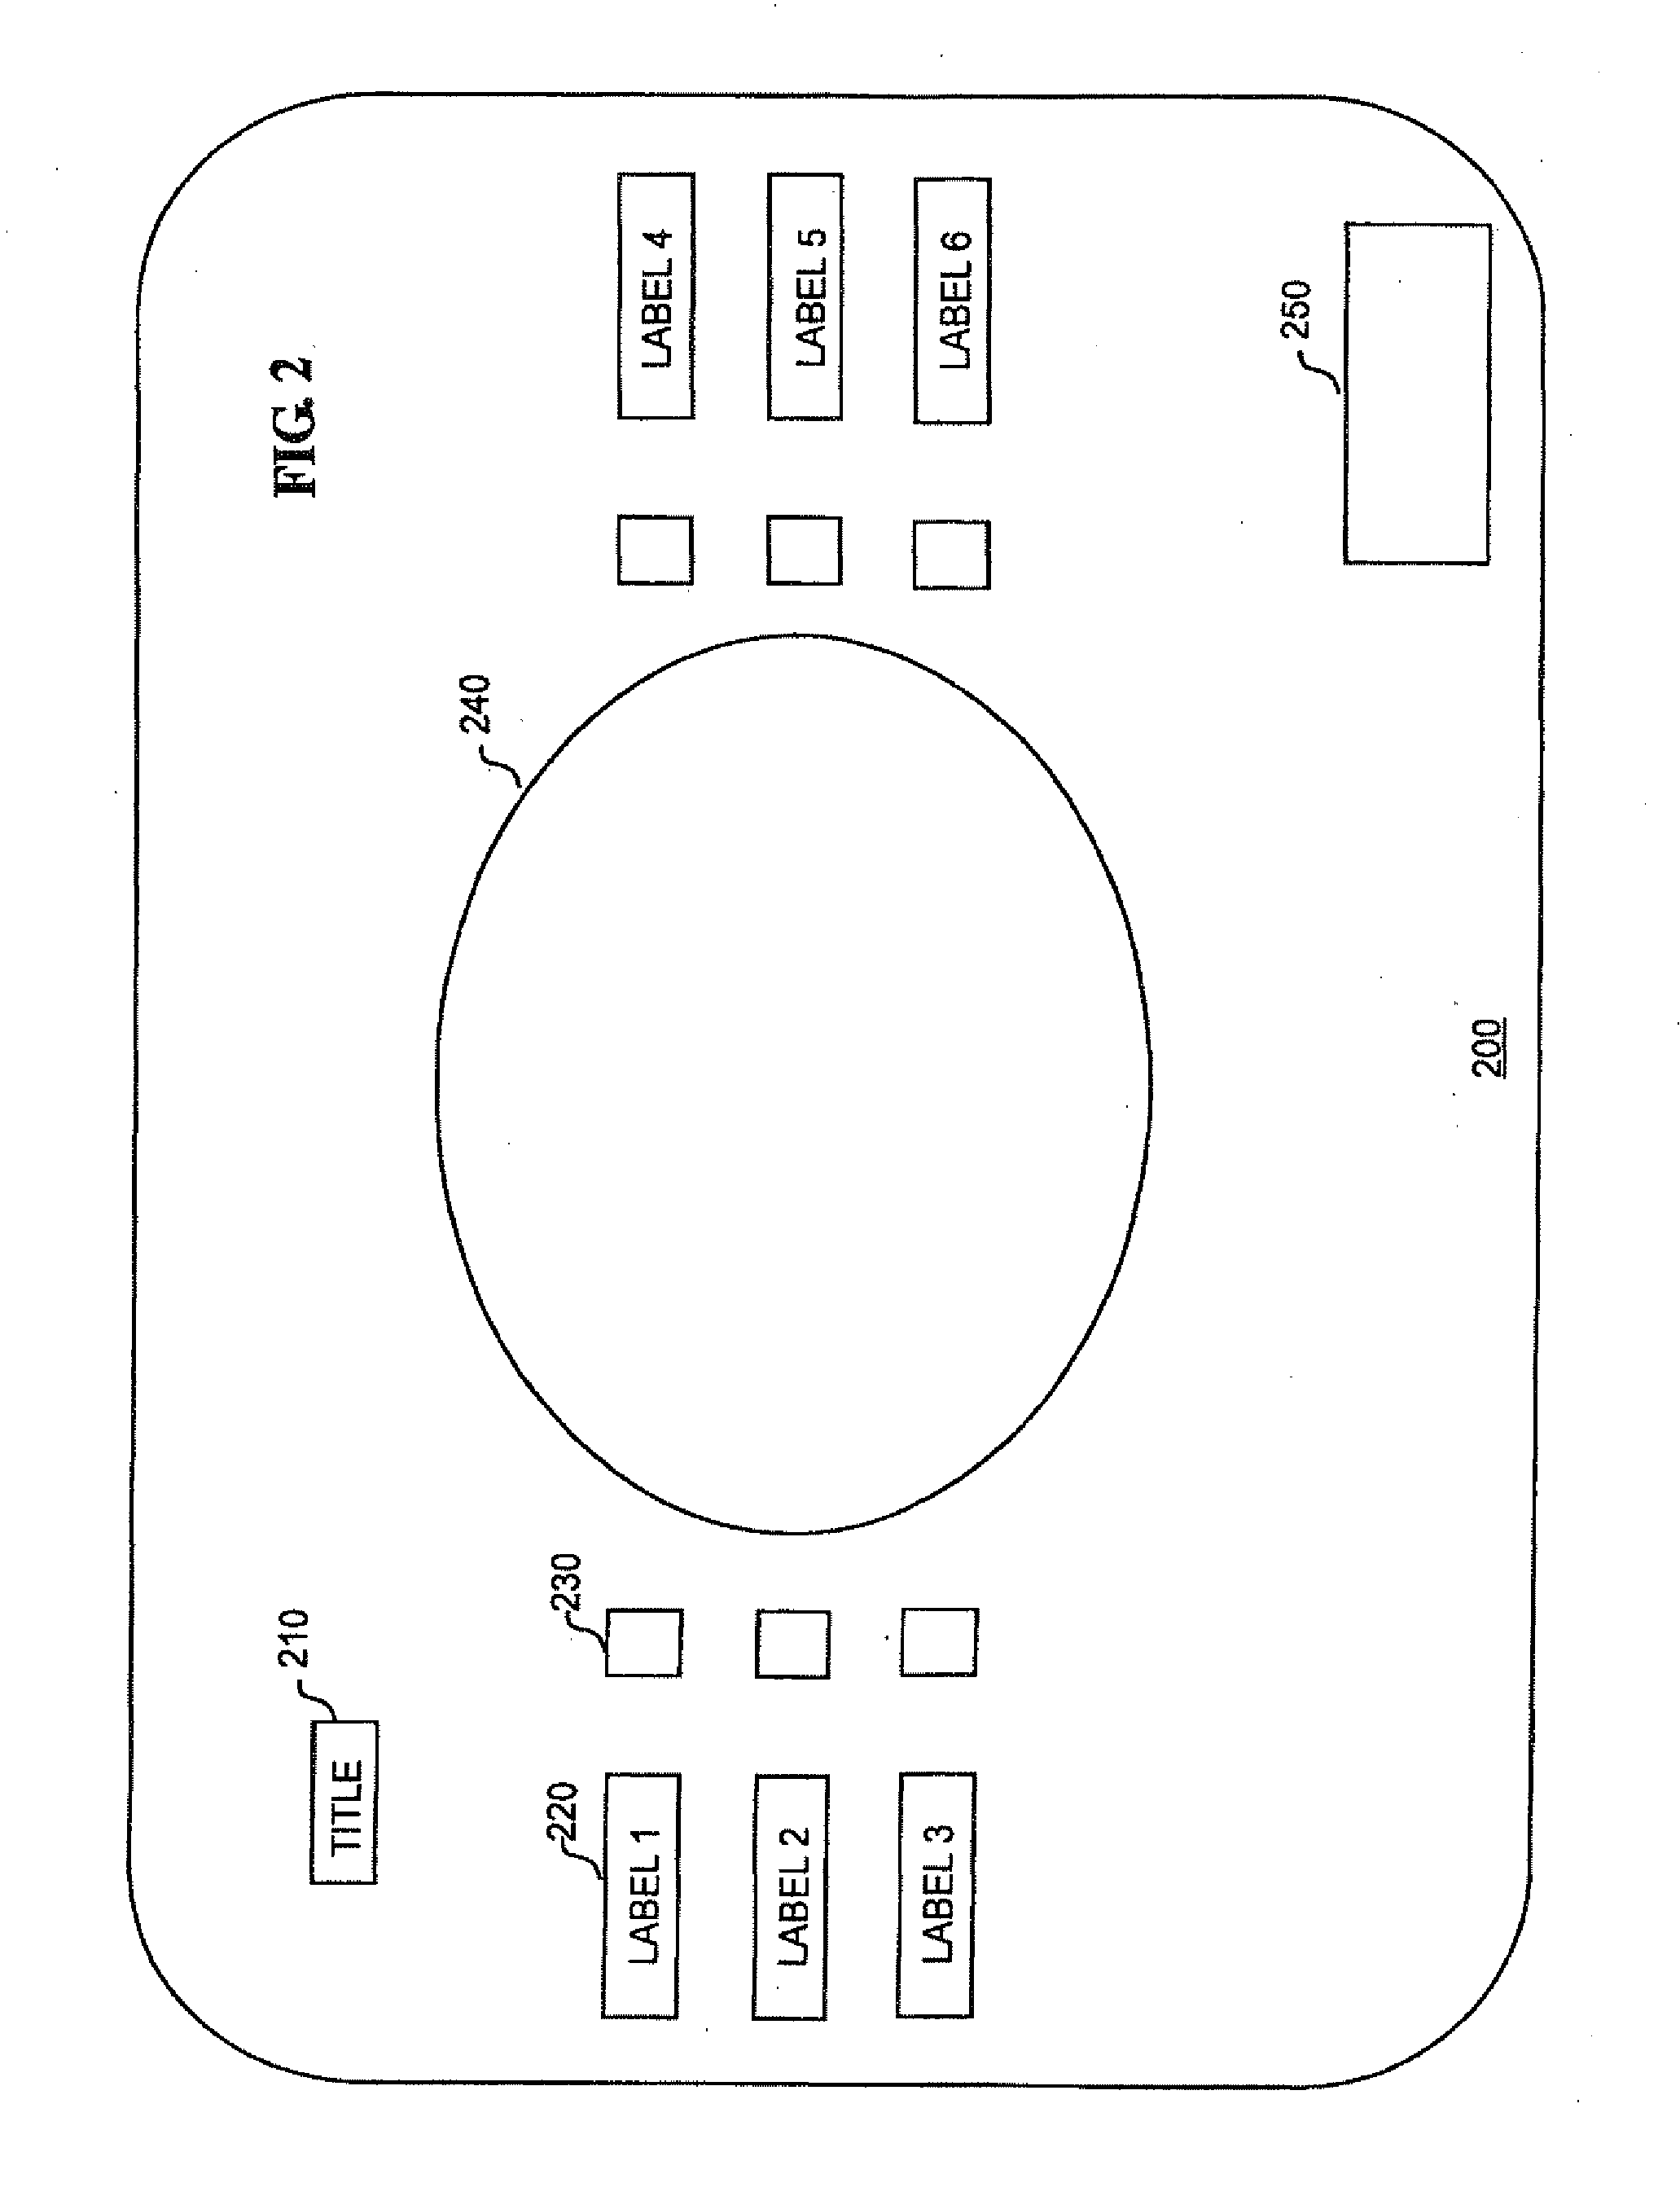 Method and apparatus for information display with intermediate datasource access